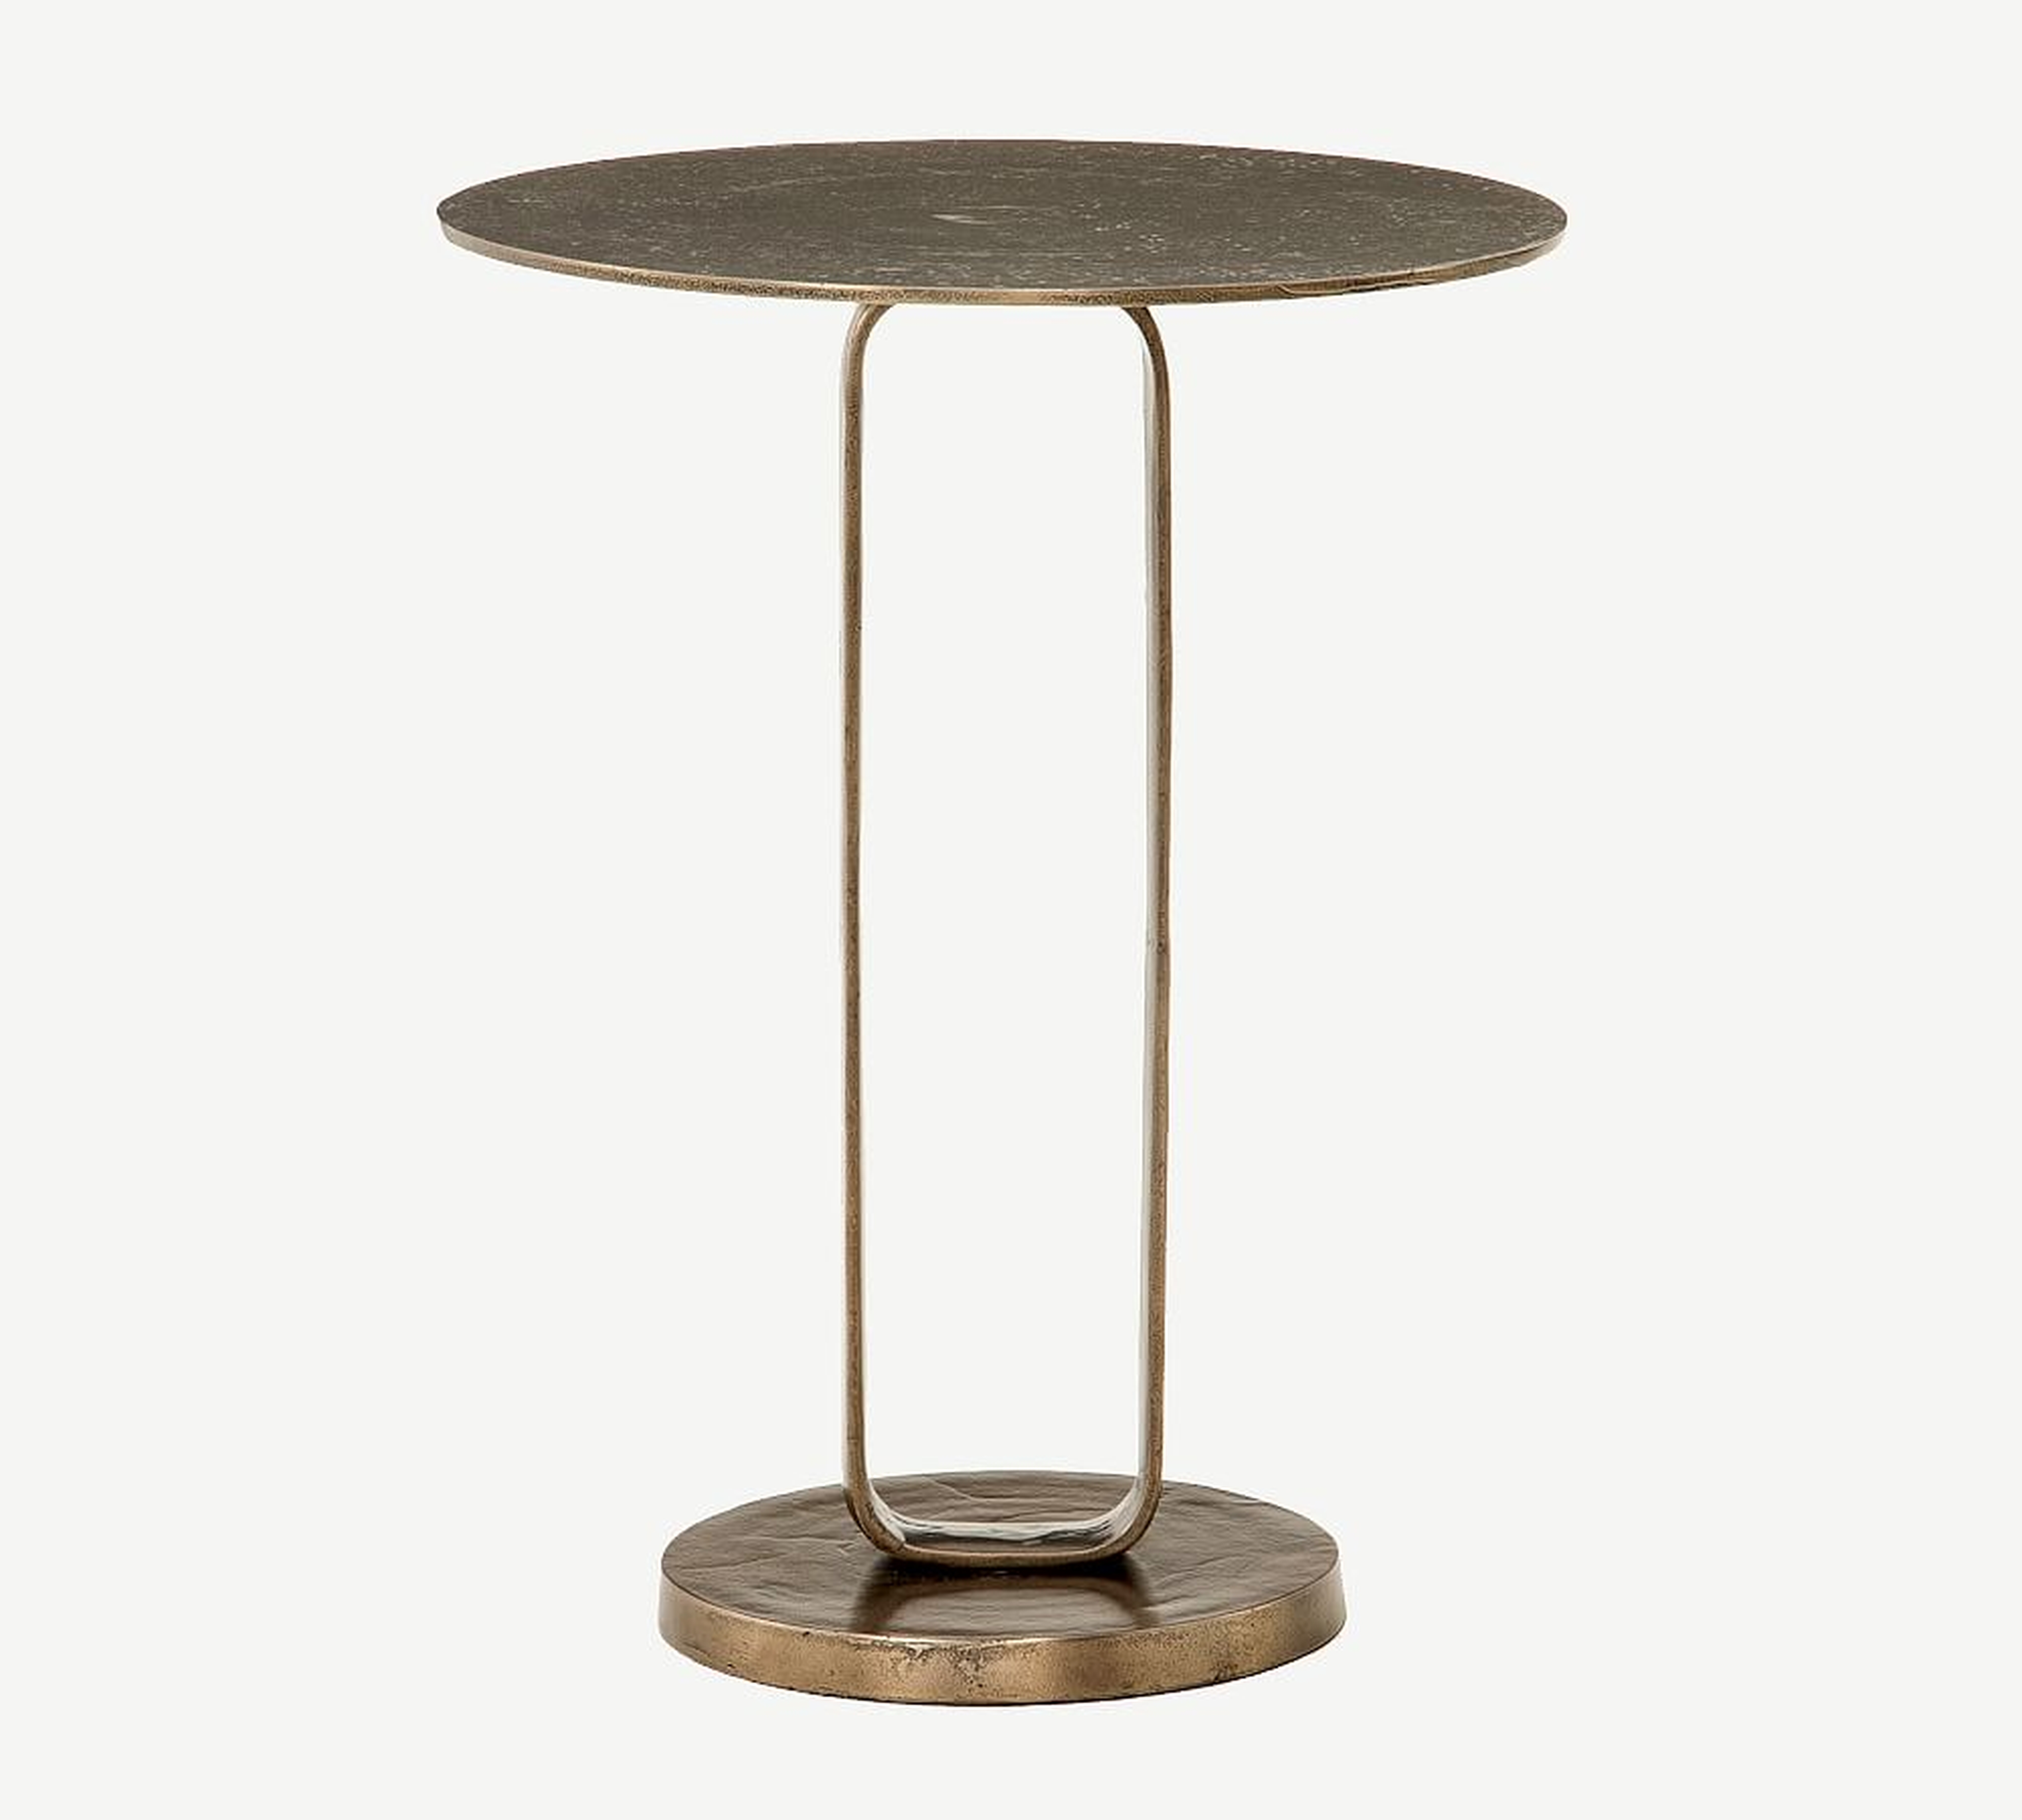 Charlesbourg 17.5" Round Metal End Table, Aged Bronze - Pottery Barn